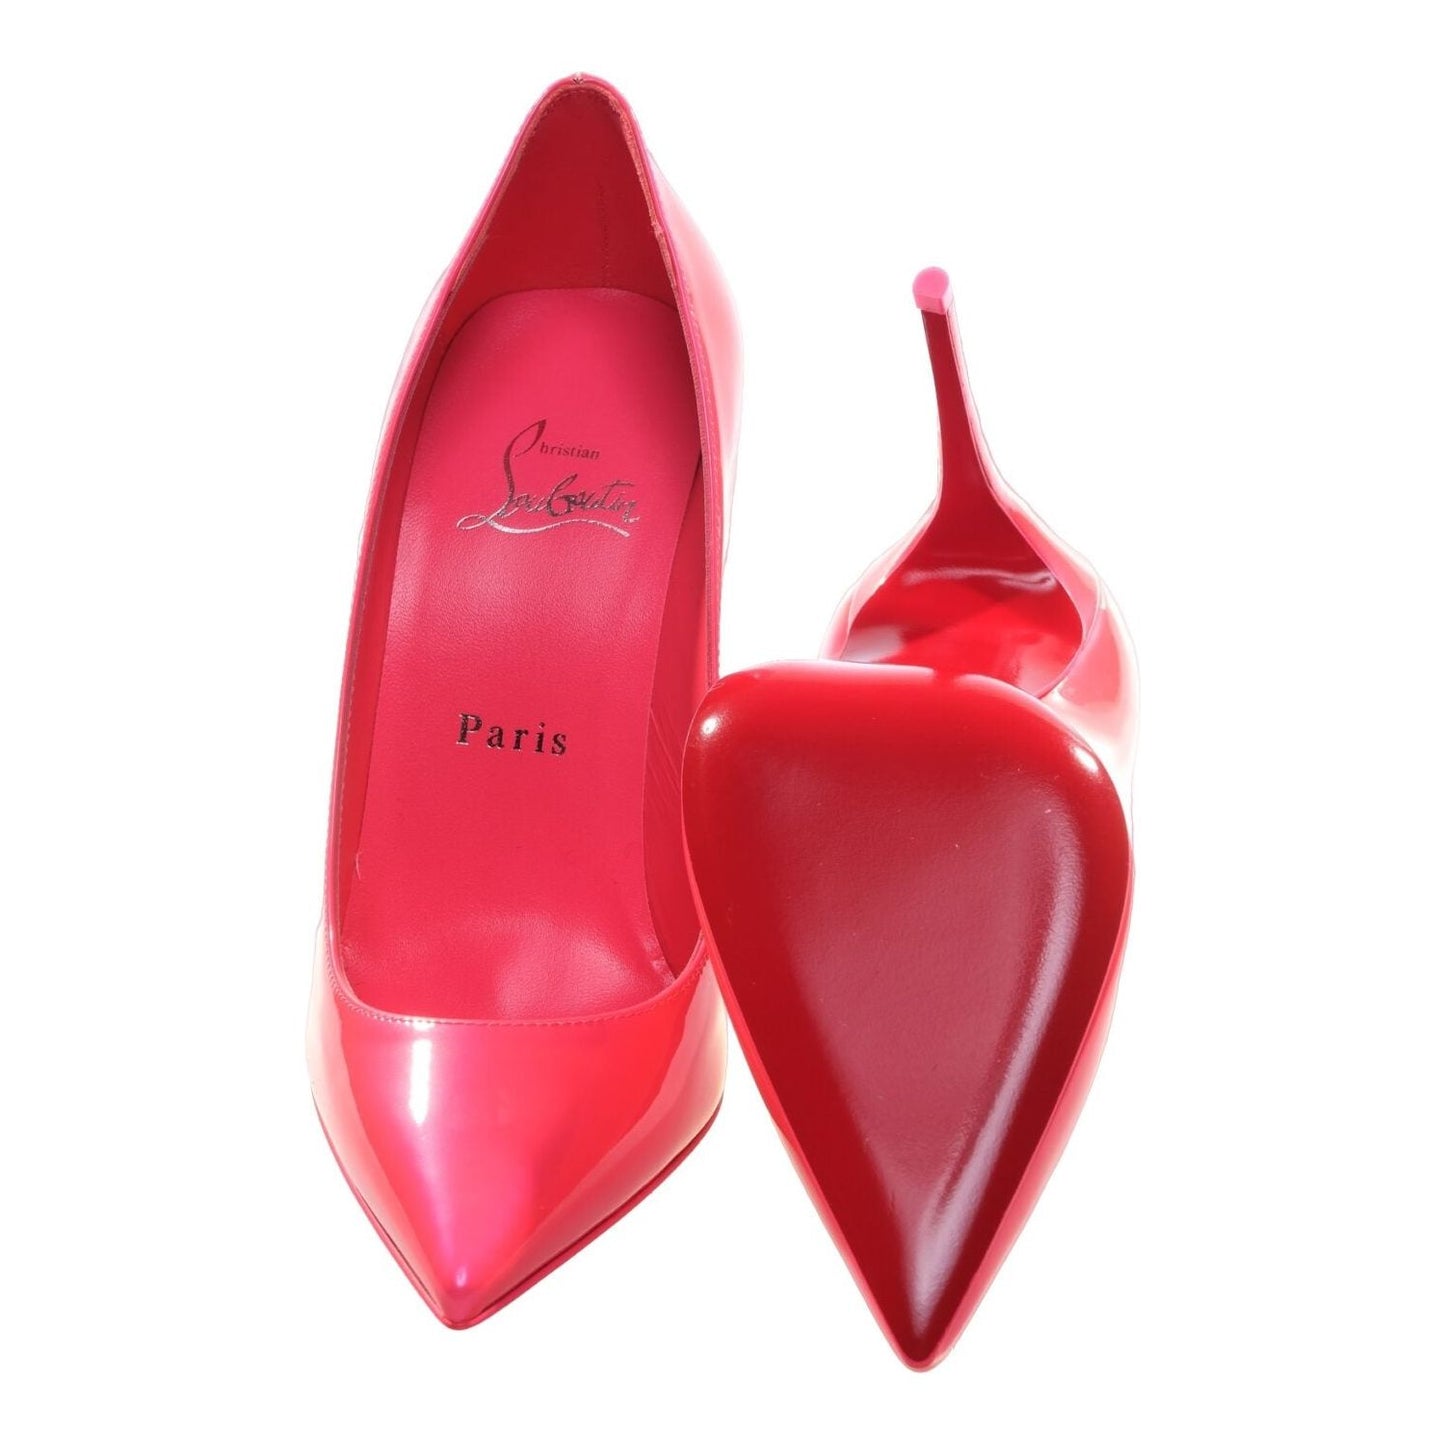 Sporty Kate Hot Pink Patent Leather High Heel Pumps